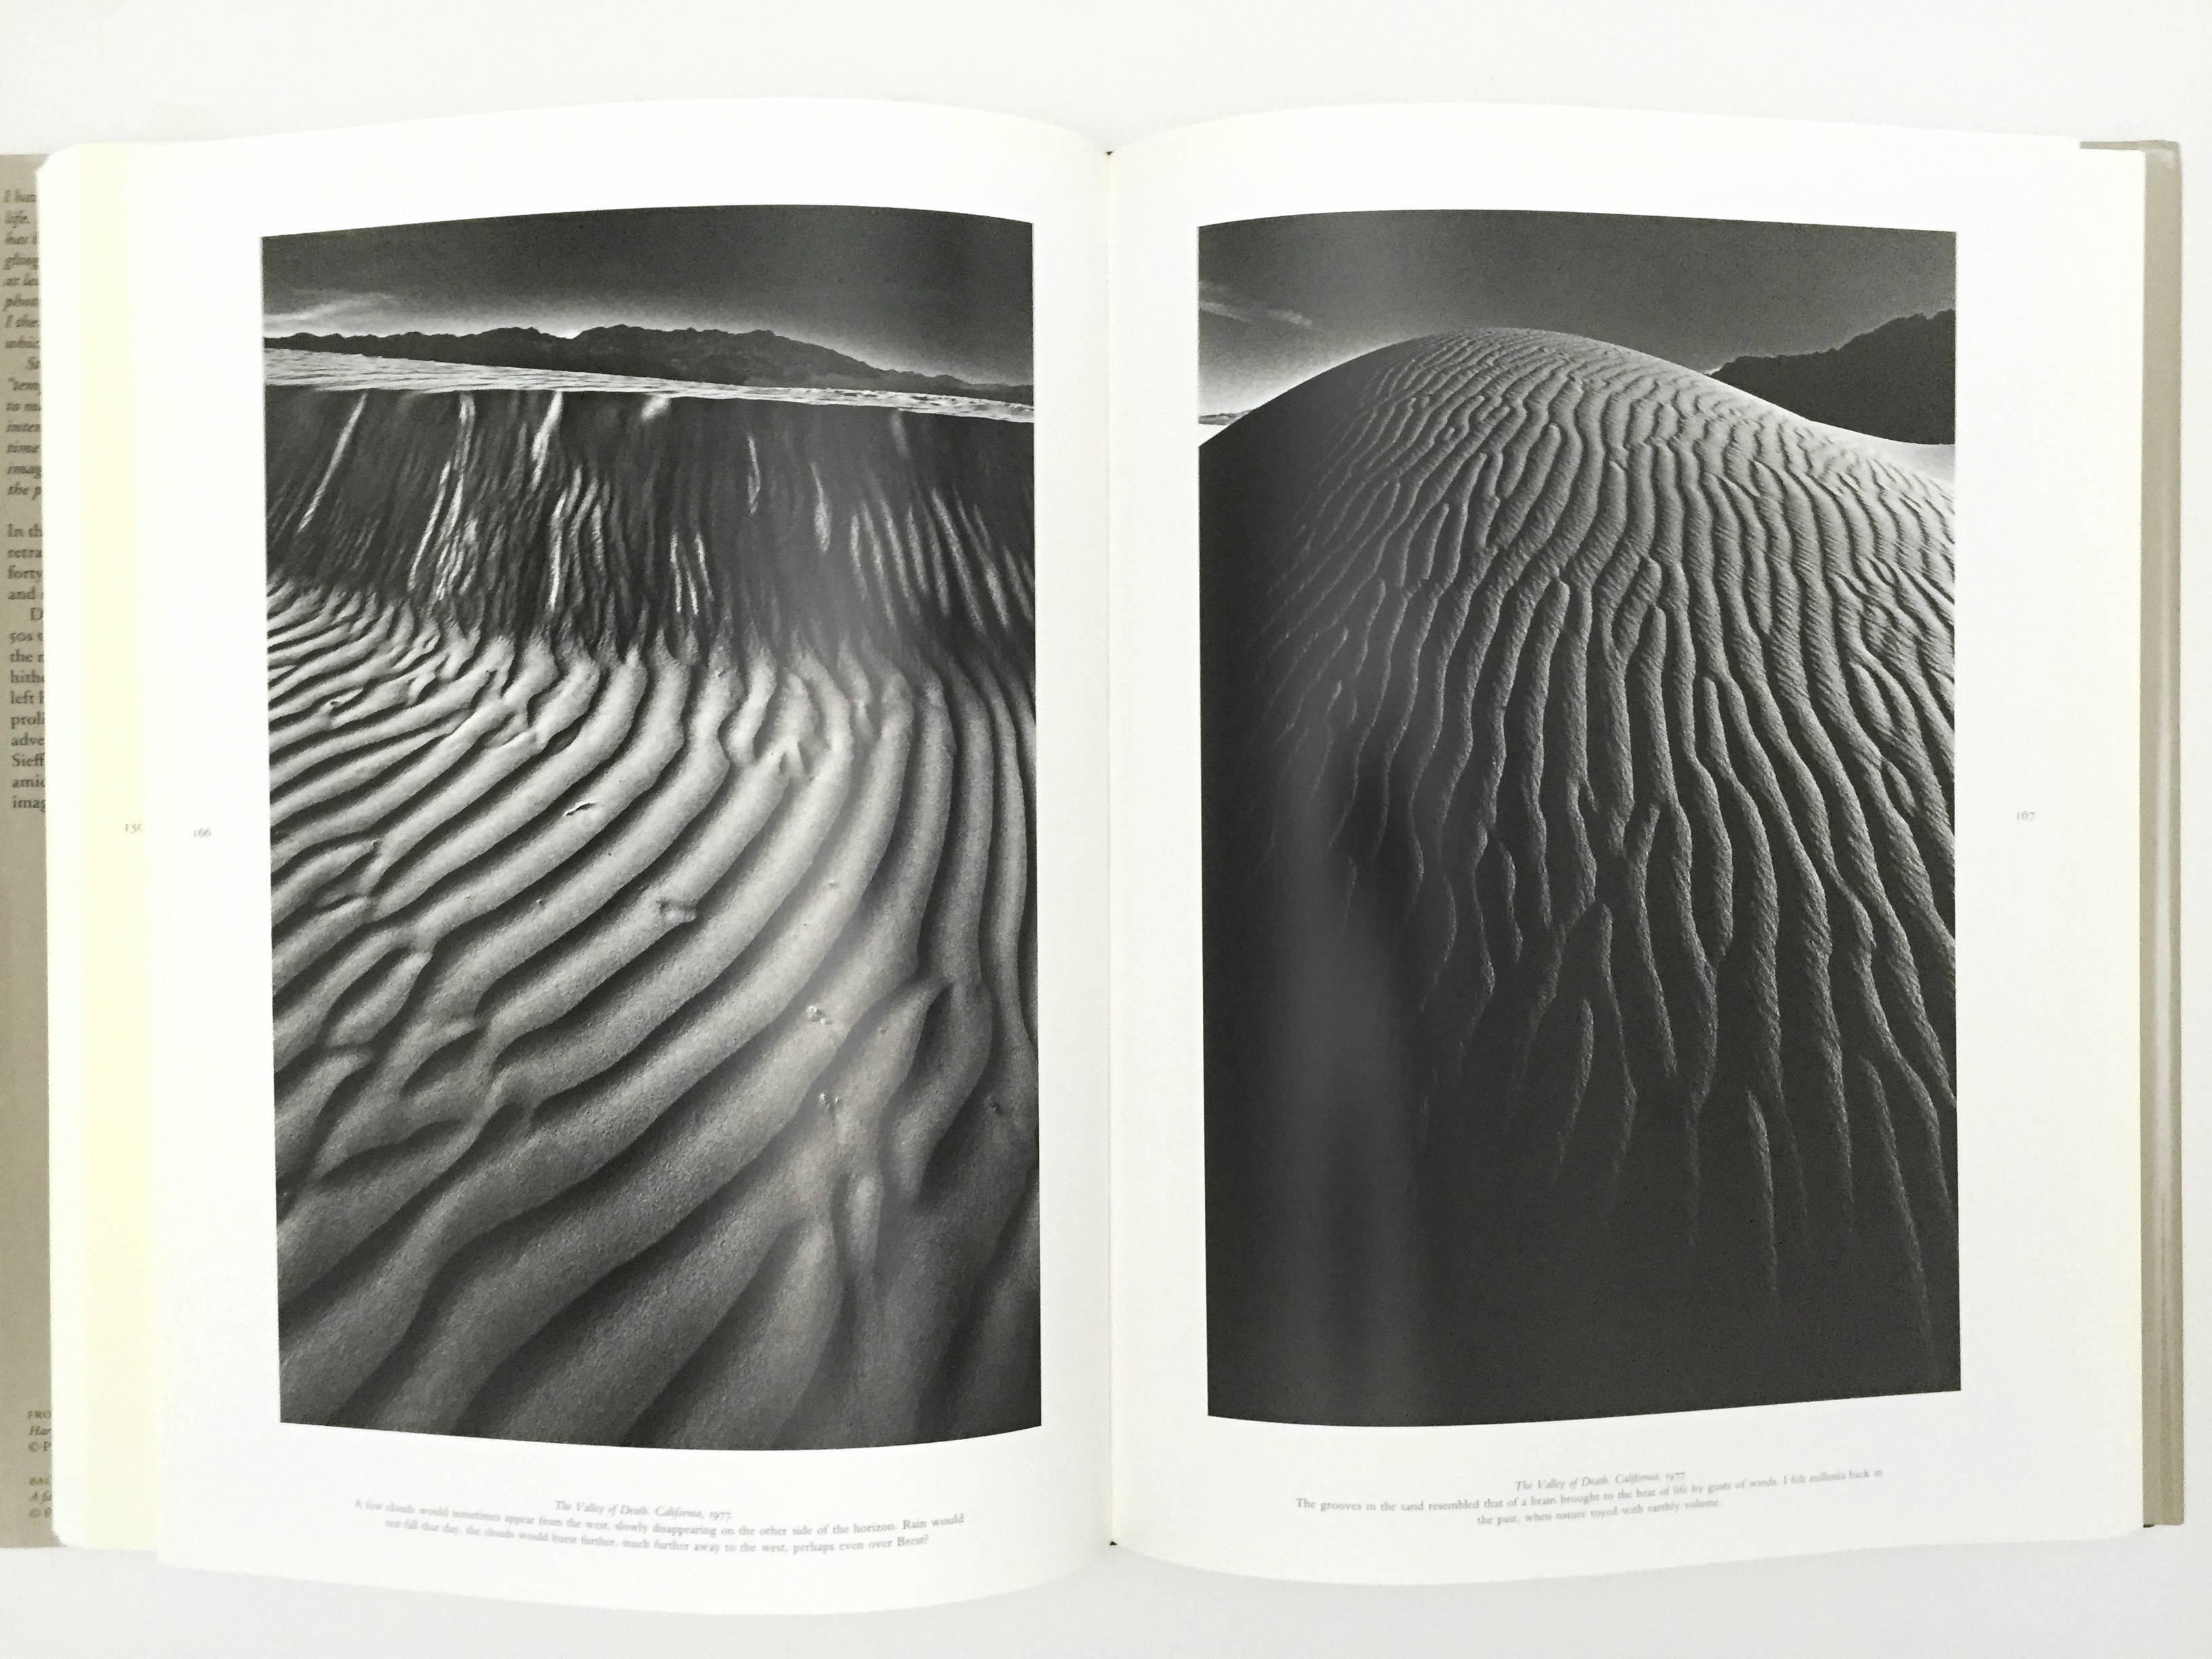 Paper Jeanloup Sieff: 40 Years of Photography - 1st Edition, Evergreen/Taschen, 1996 For Sale